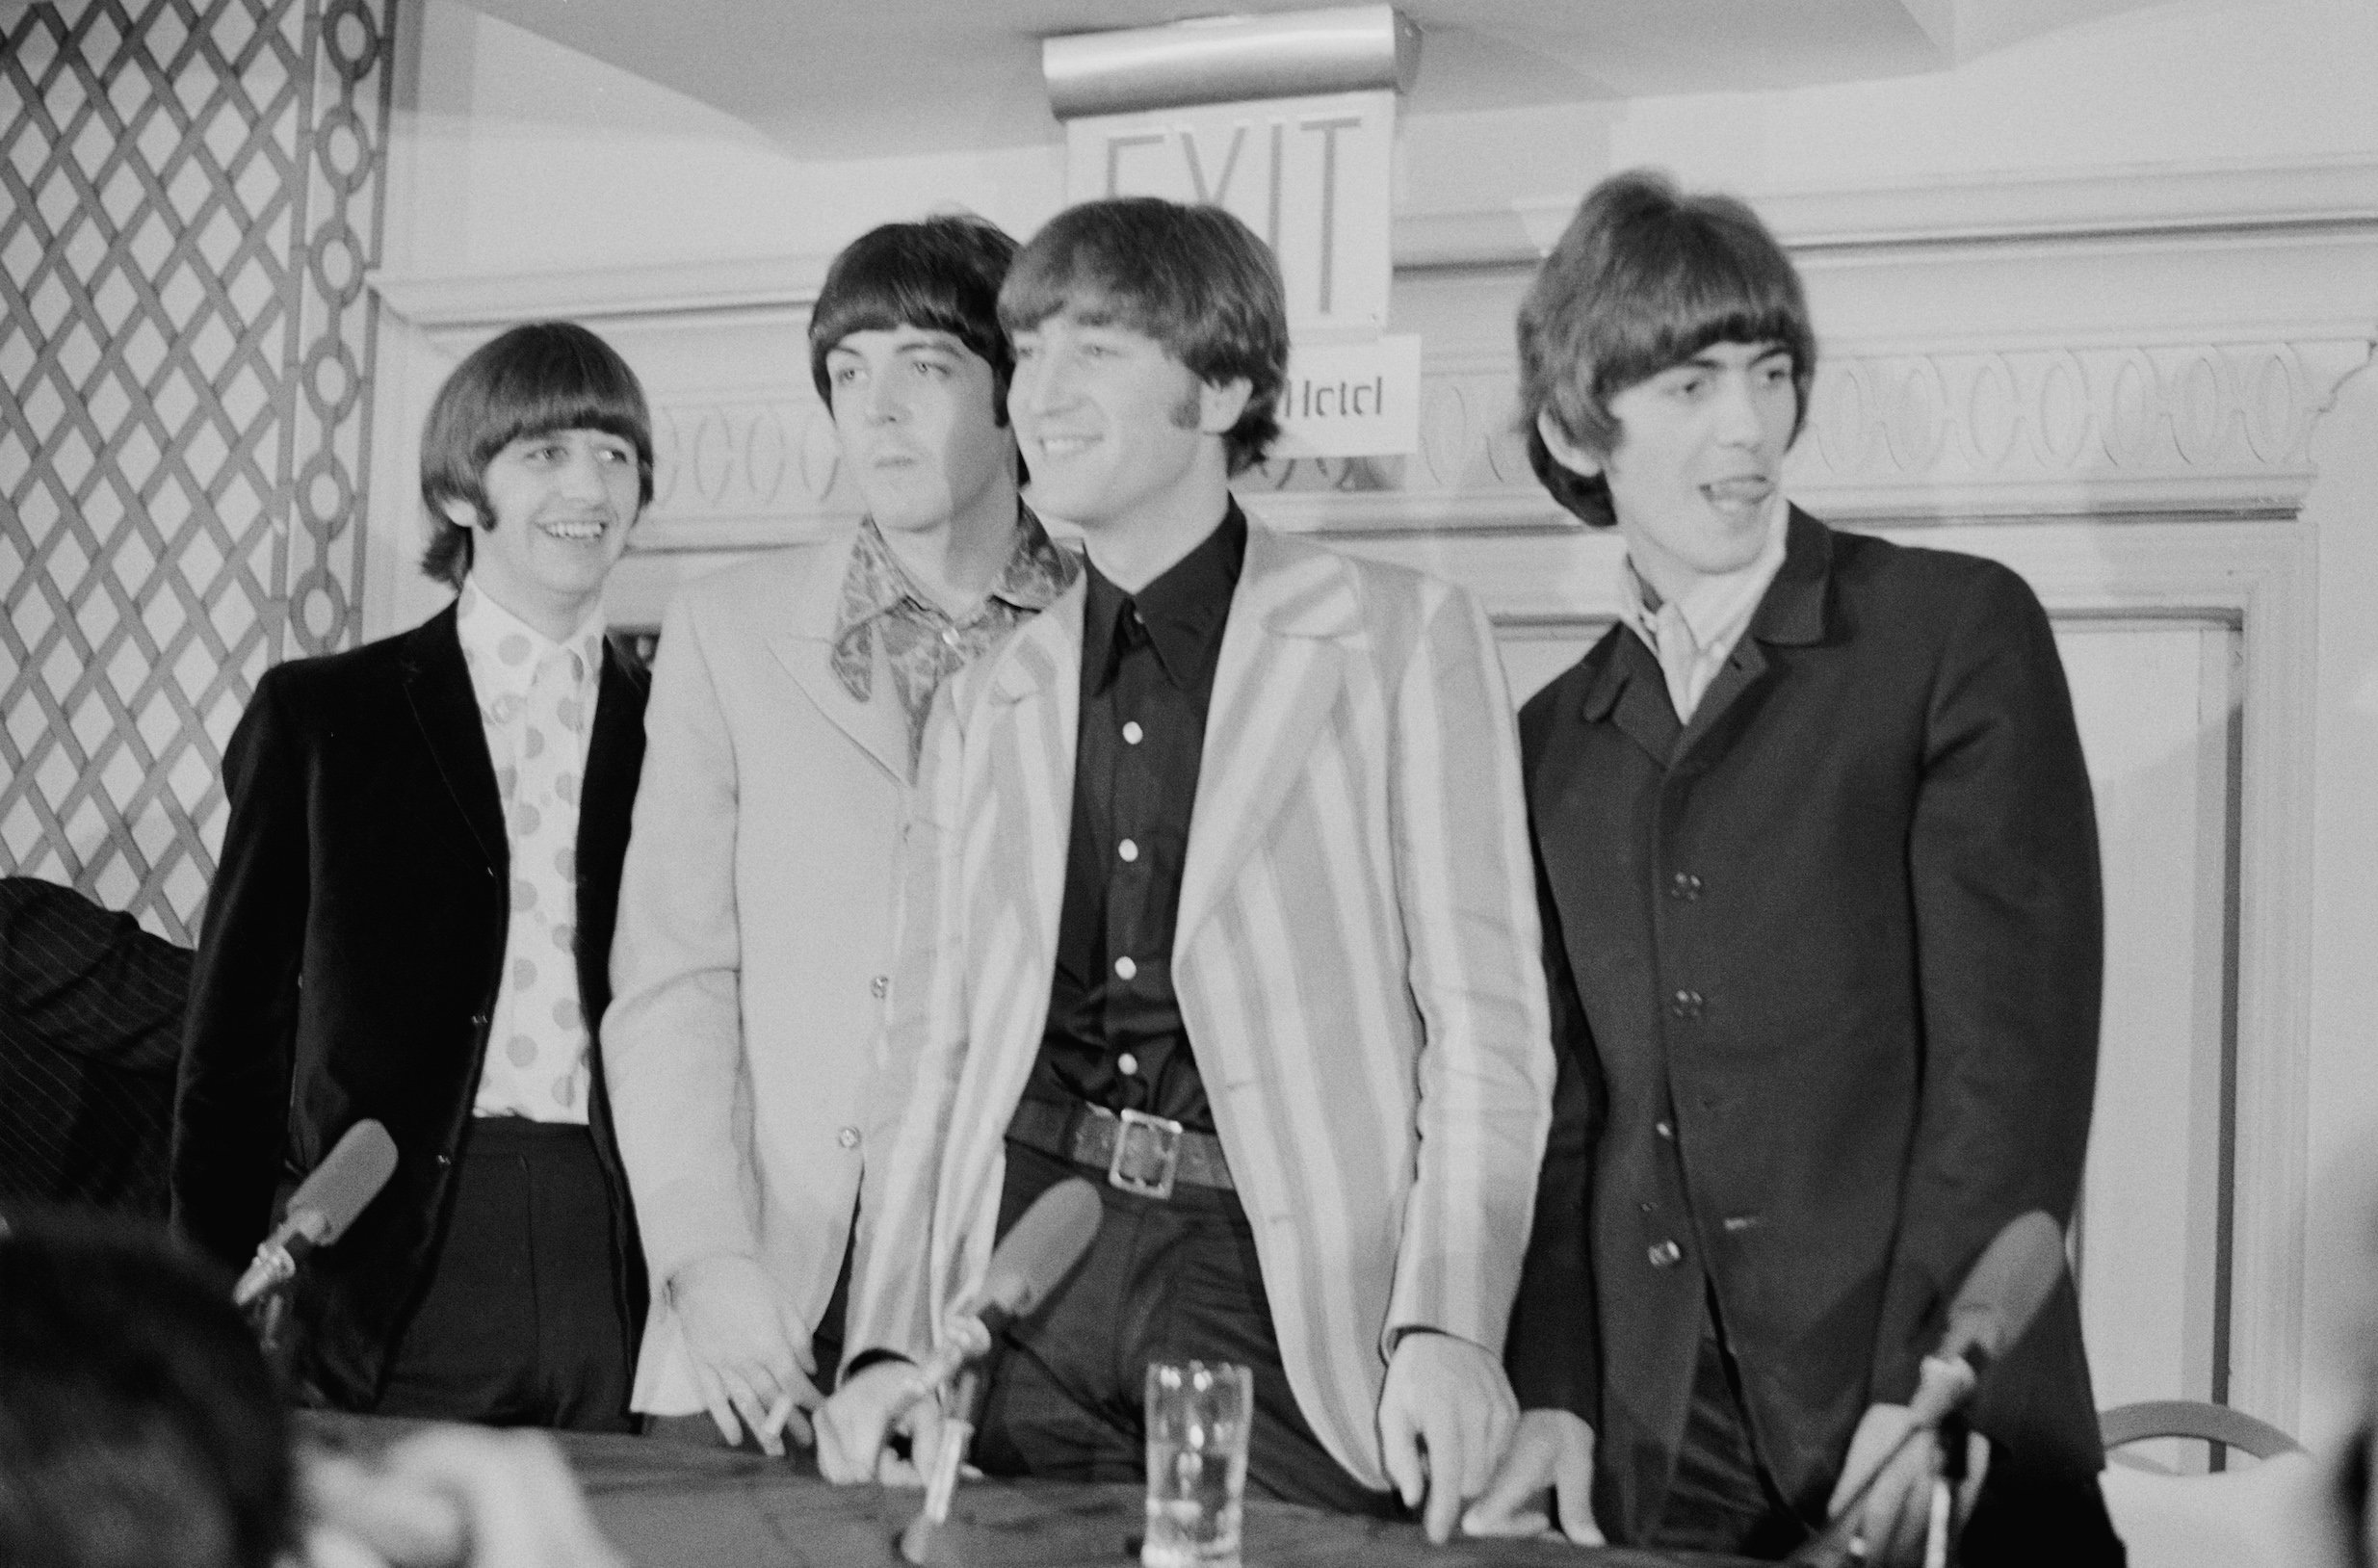 The Beatles attend a press conference in New York before performing at Shea Stadium